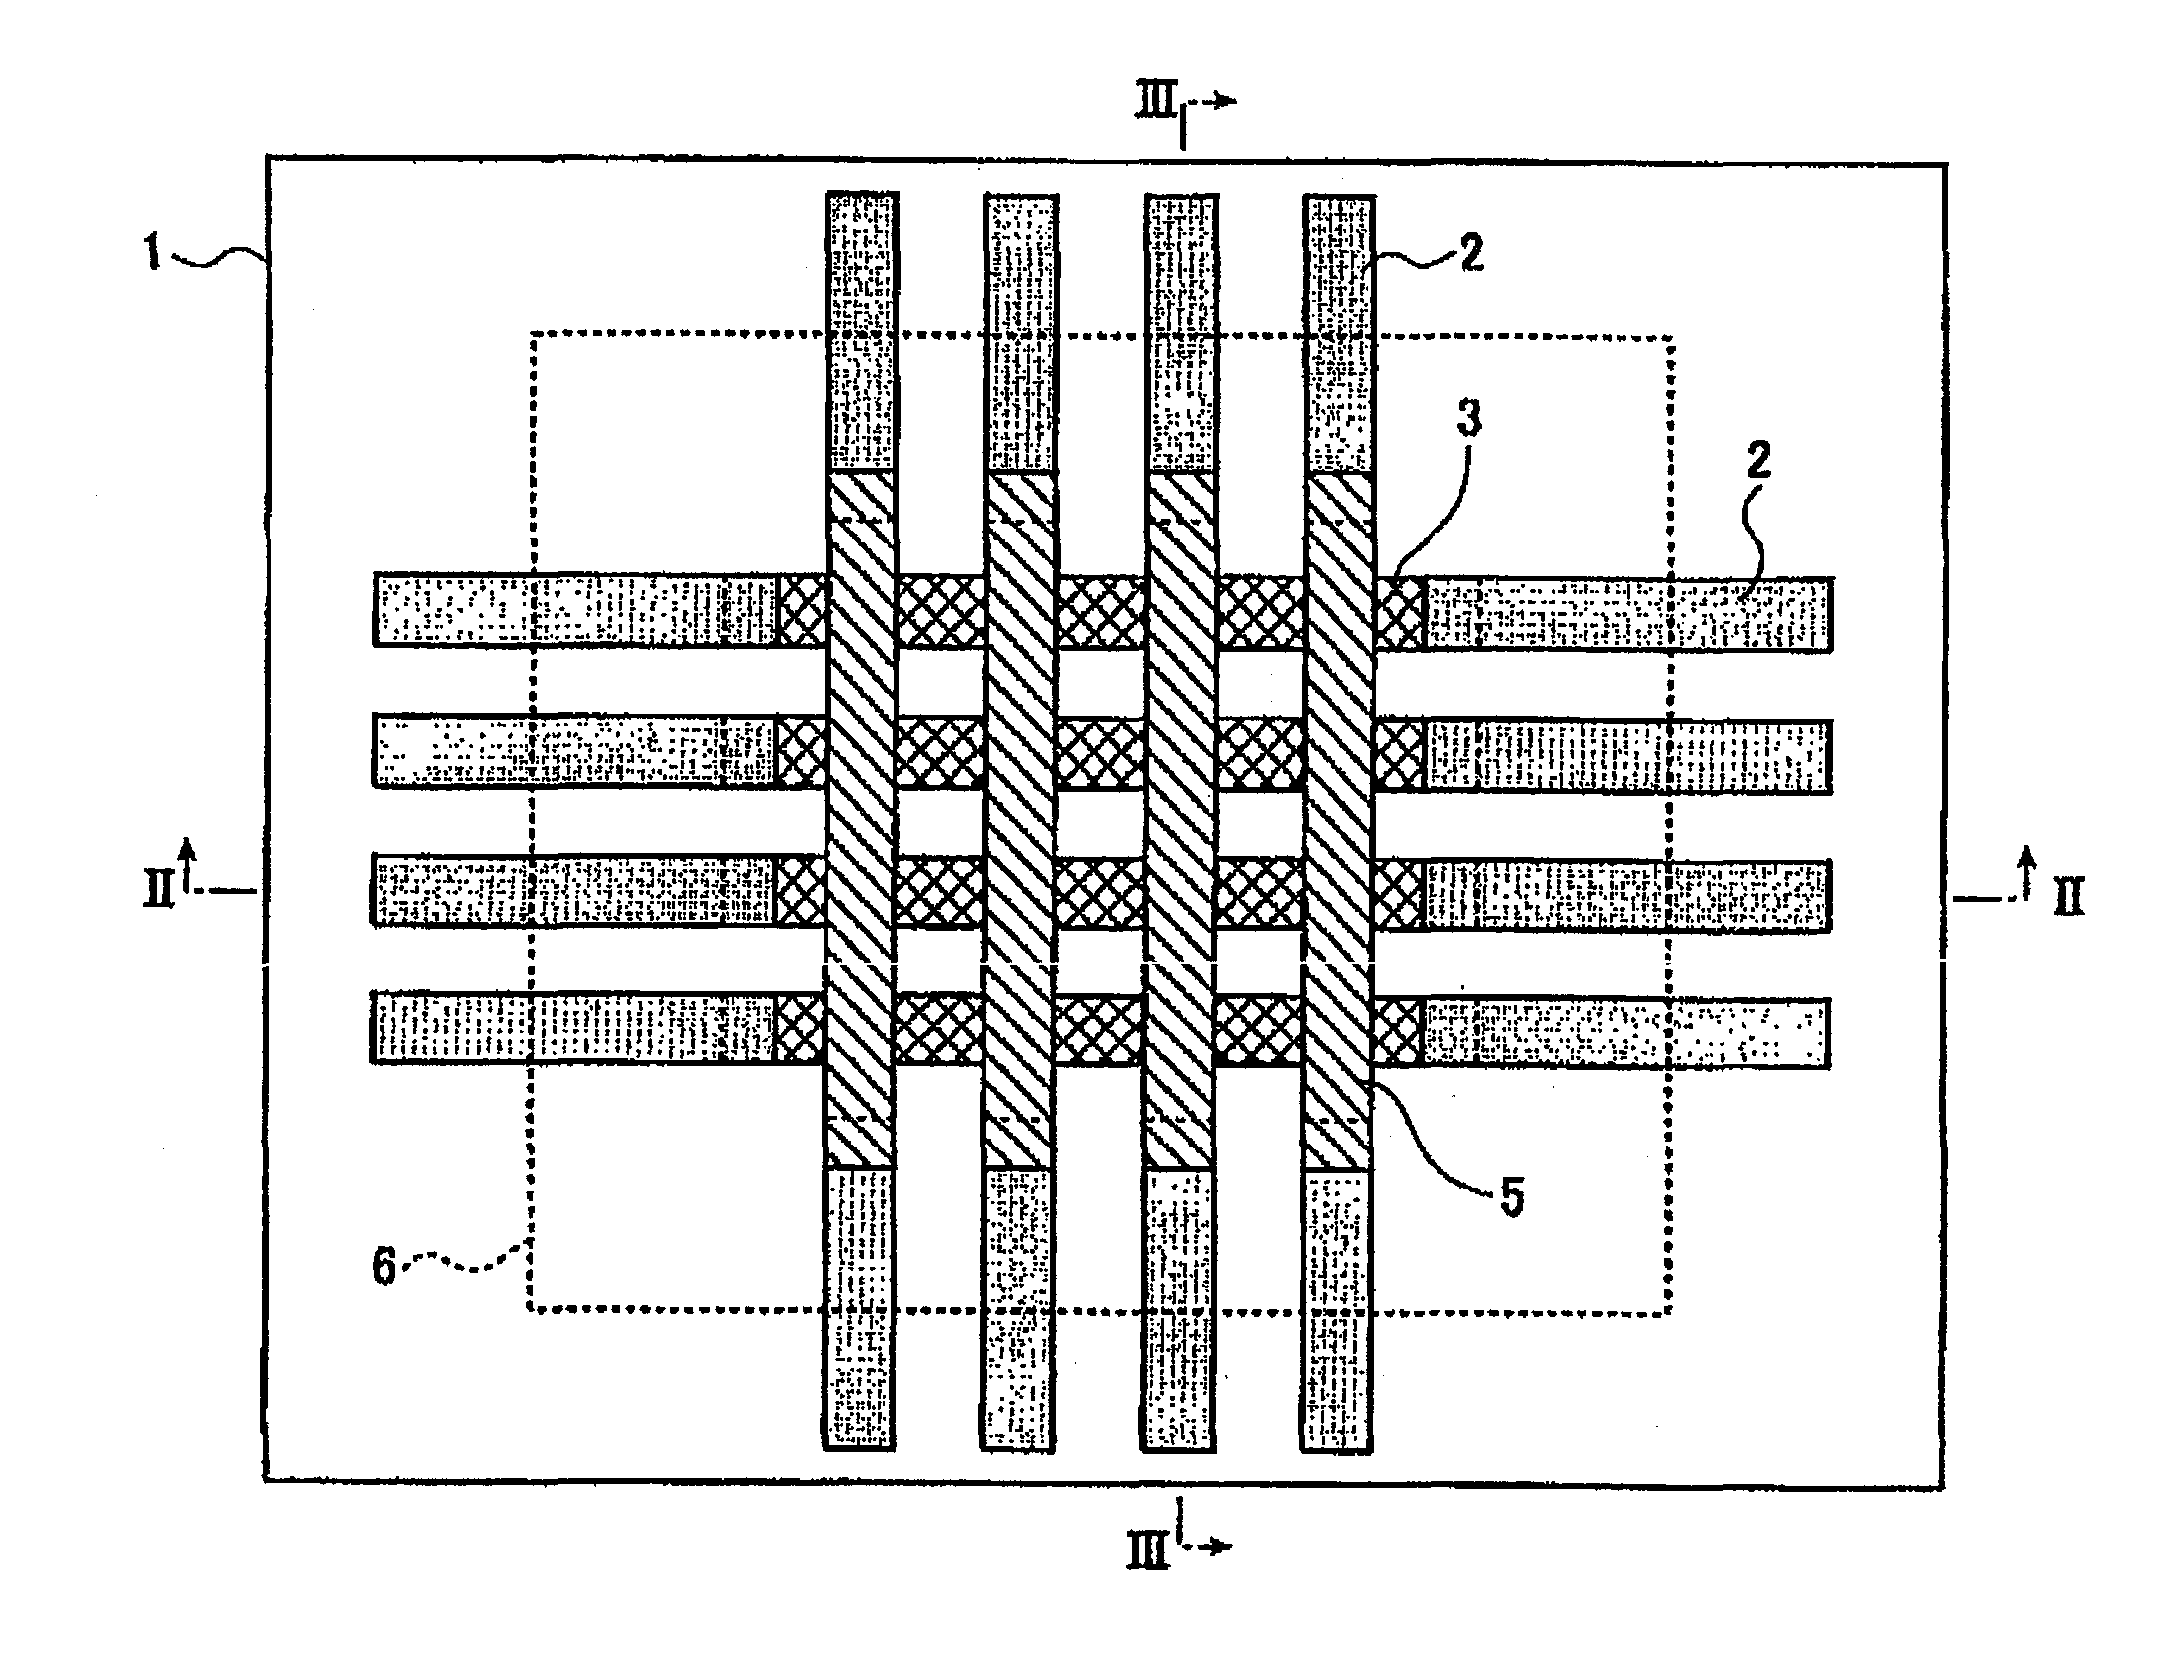 Laminate for forming a substrate with wires, substrate with wires and methods for producing them